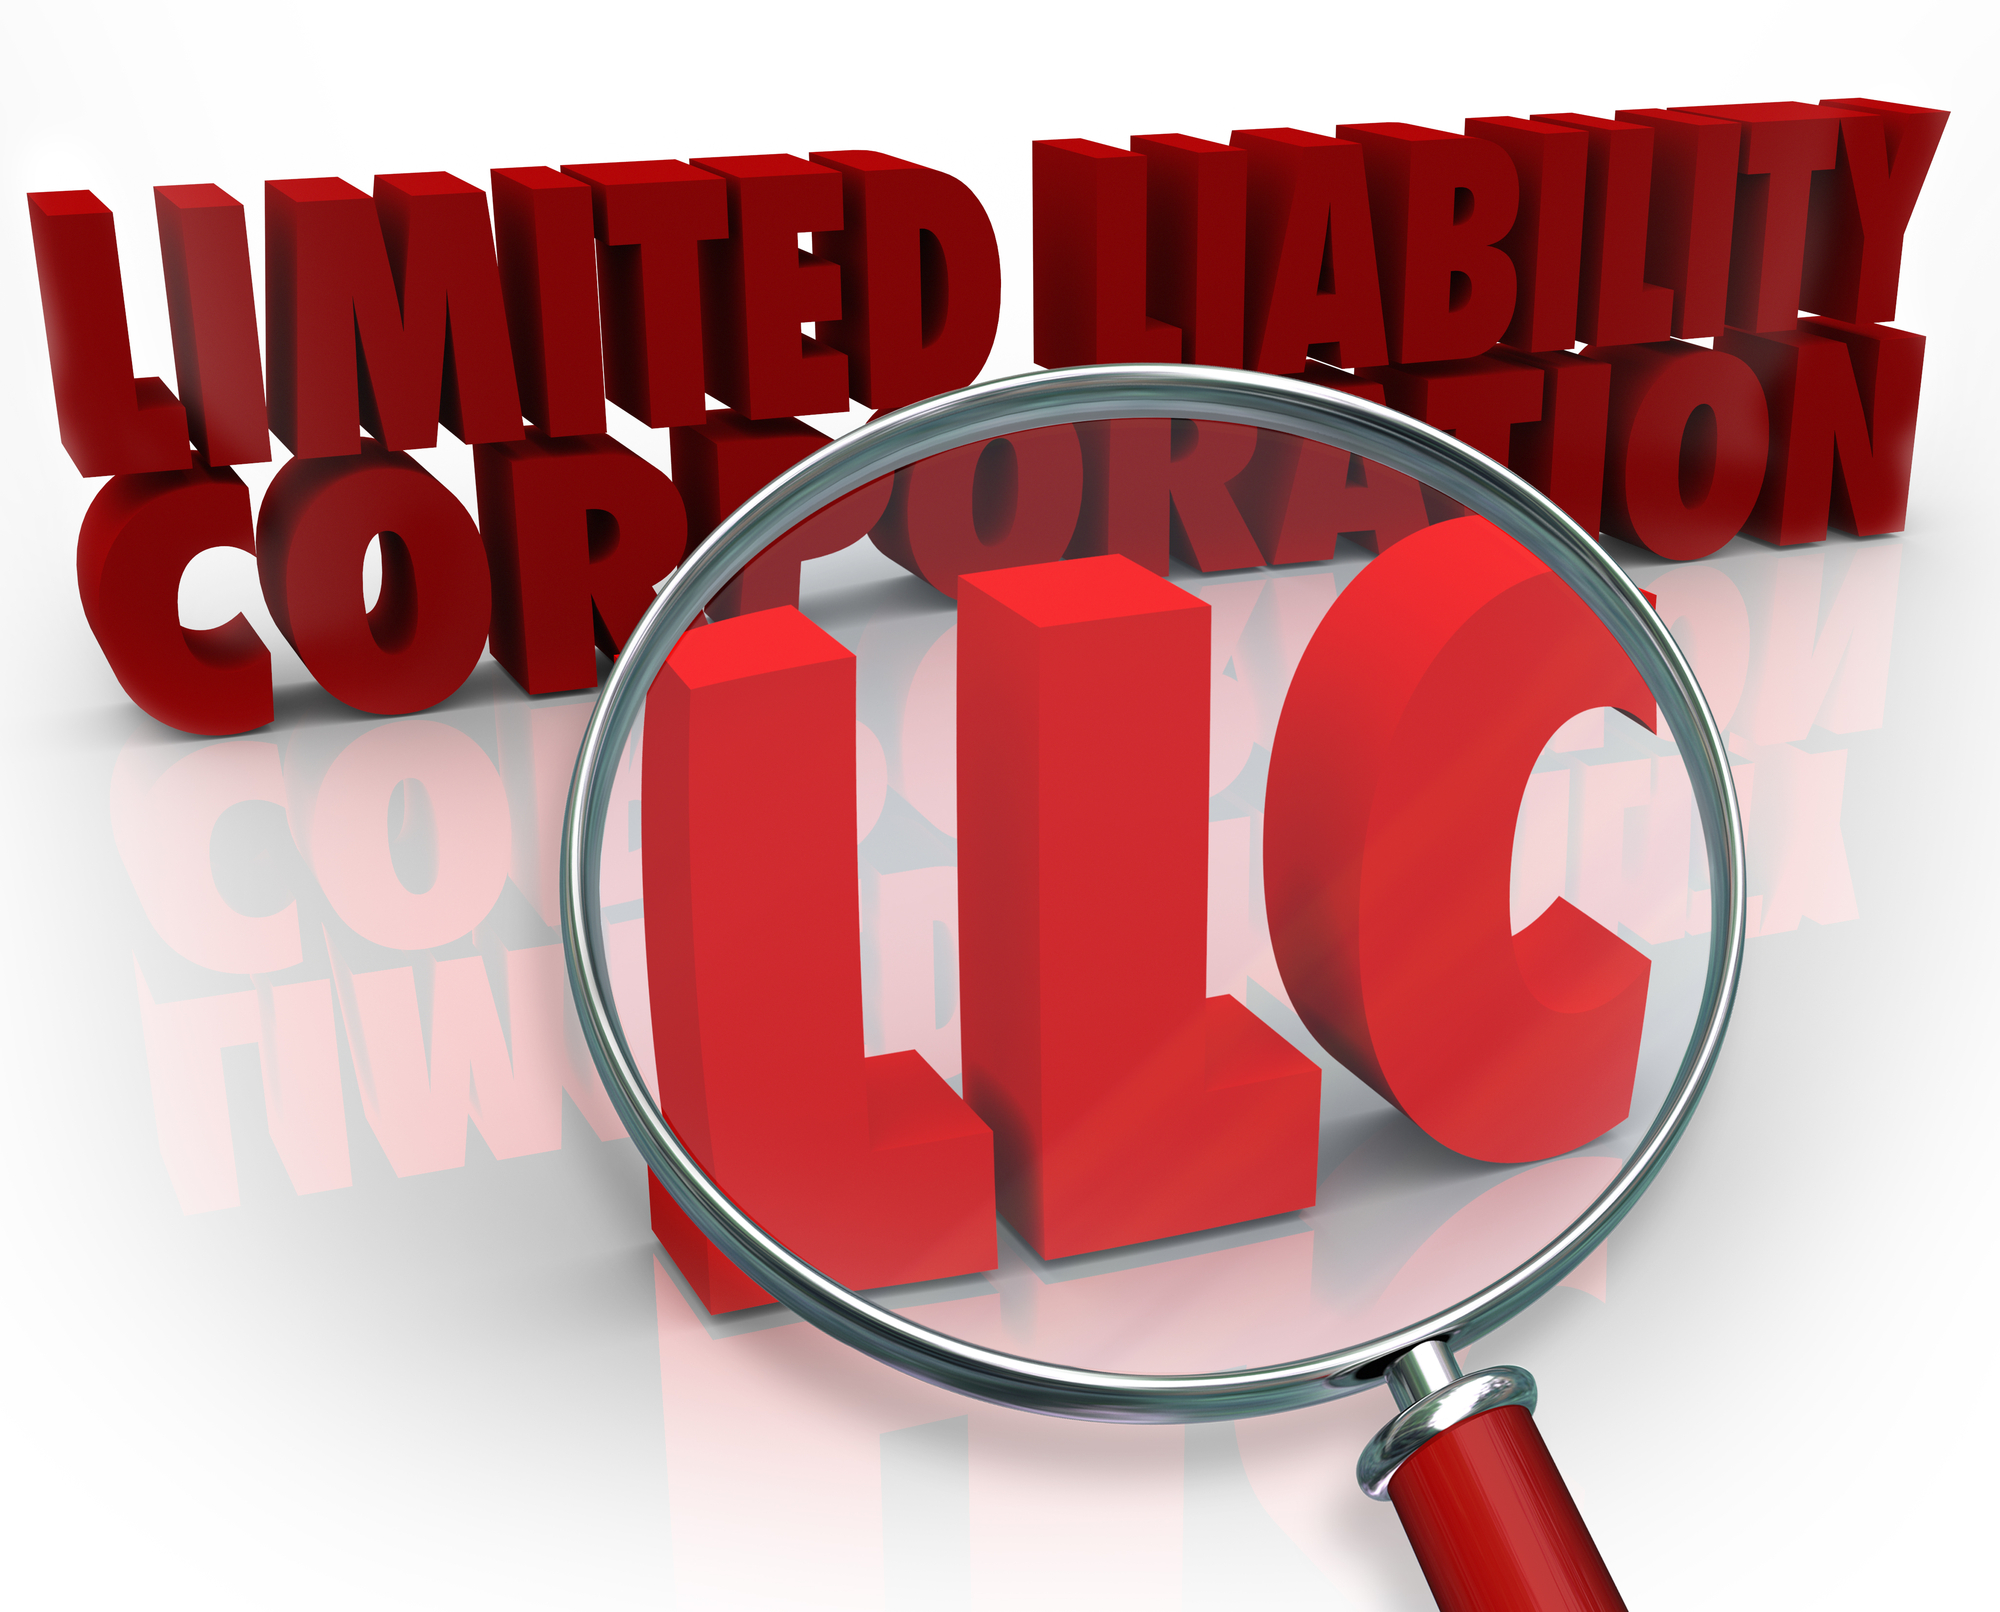 New York requires disclosure of LLC ownership to law enforcement and regulators